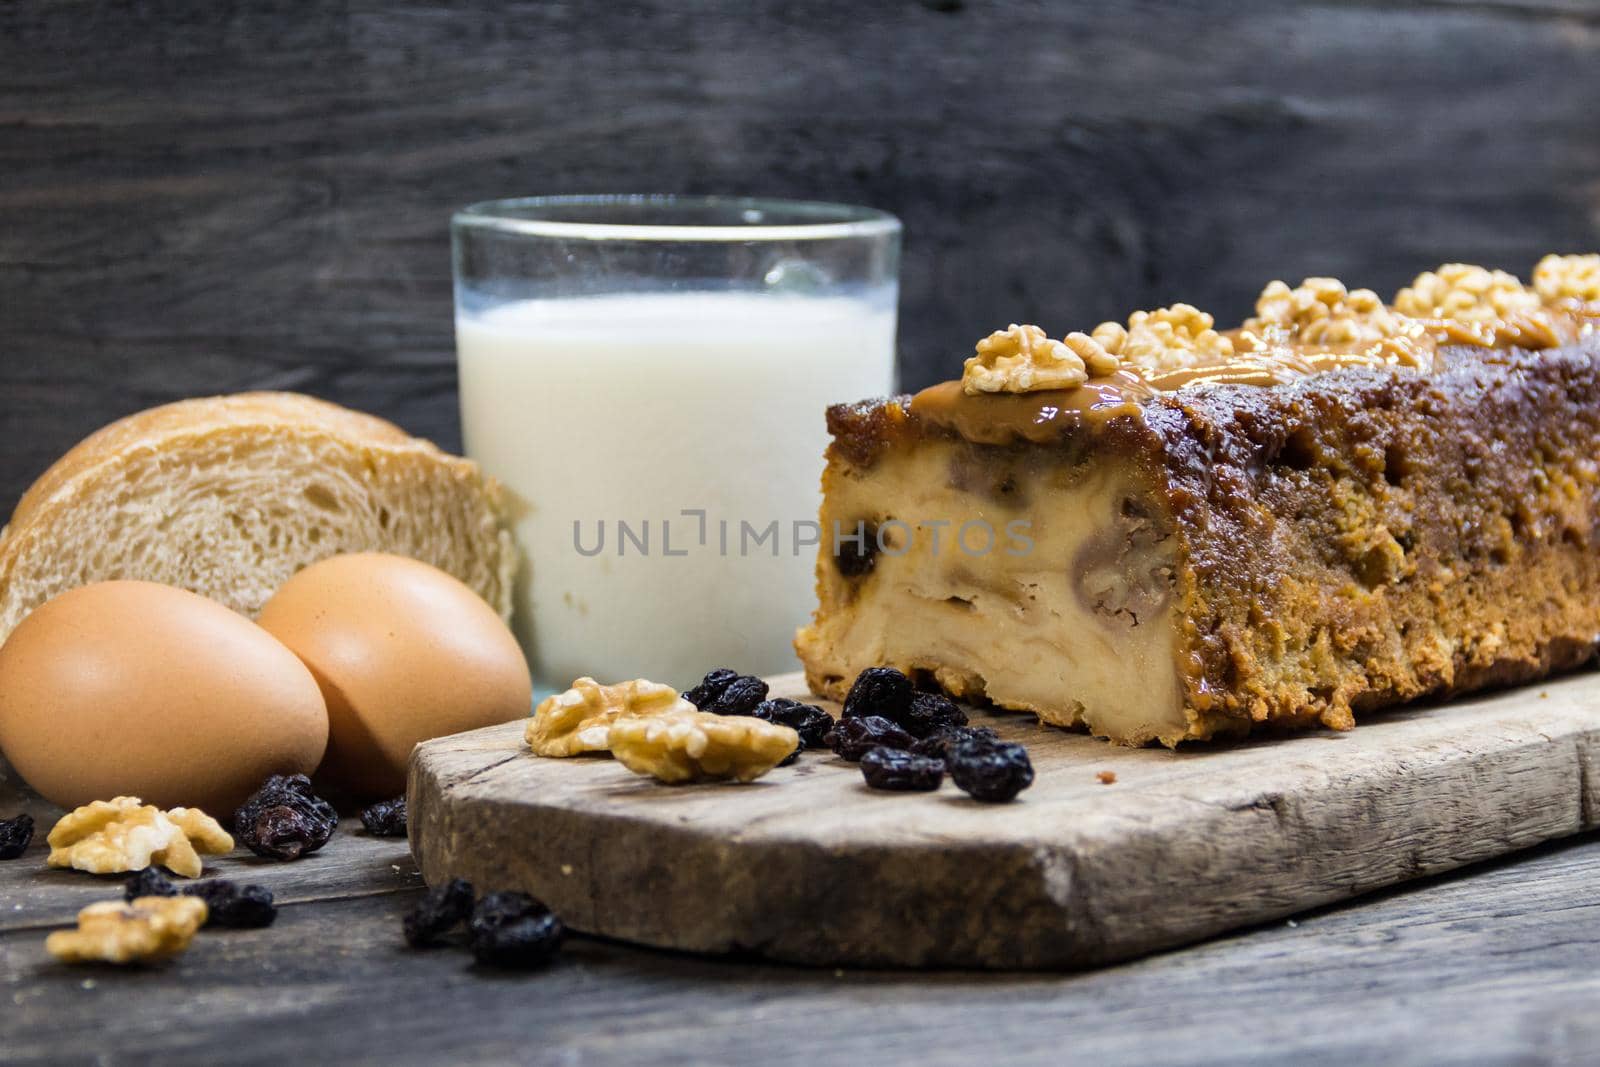 Bread pudding, made with milk, eggs, stale bread and dried fruits on rustic wooden background by GabrielaBertolini